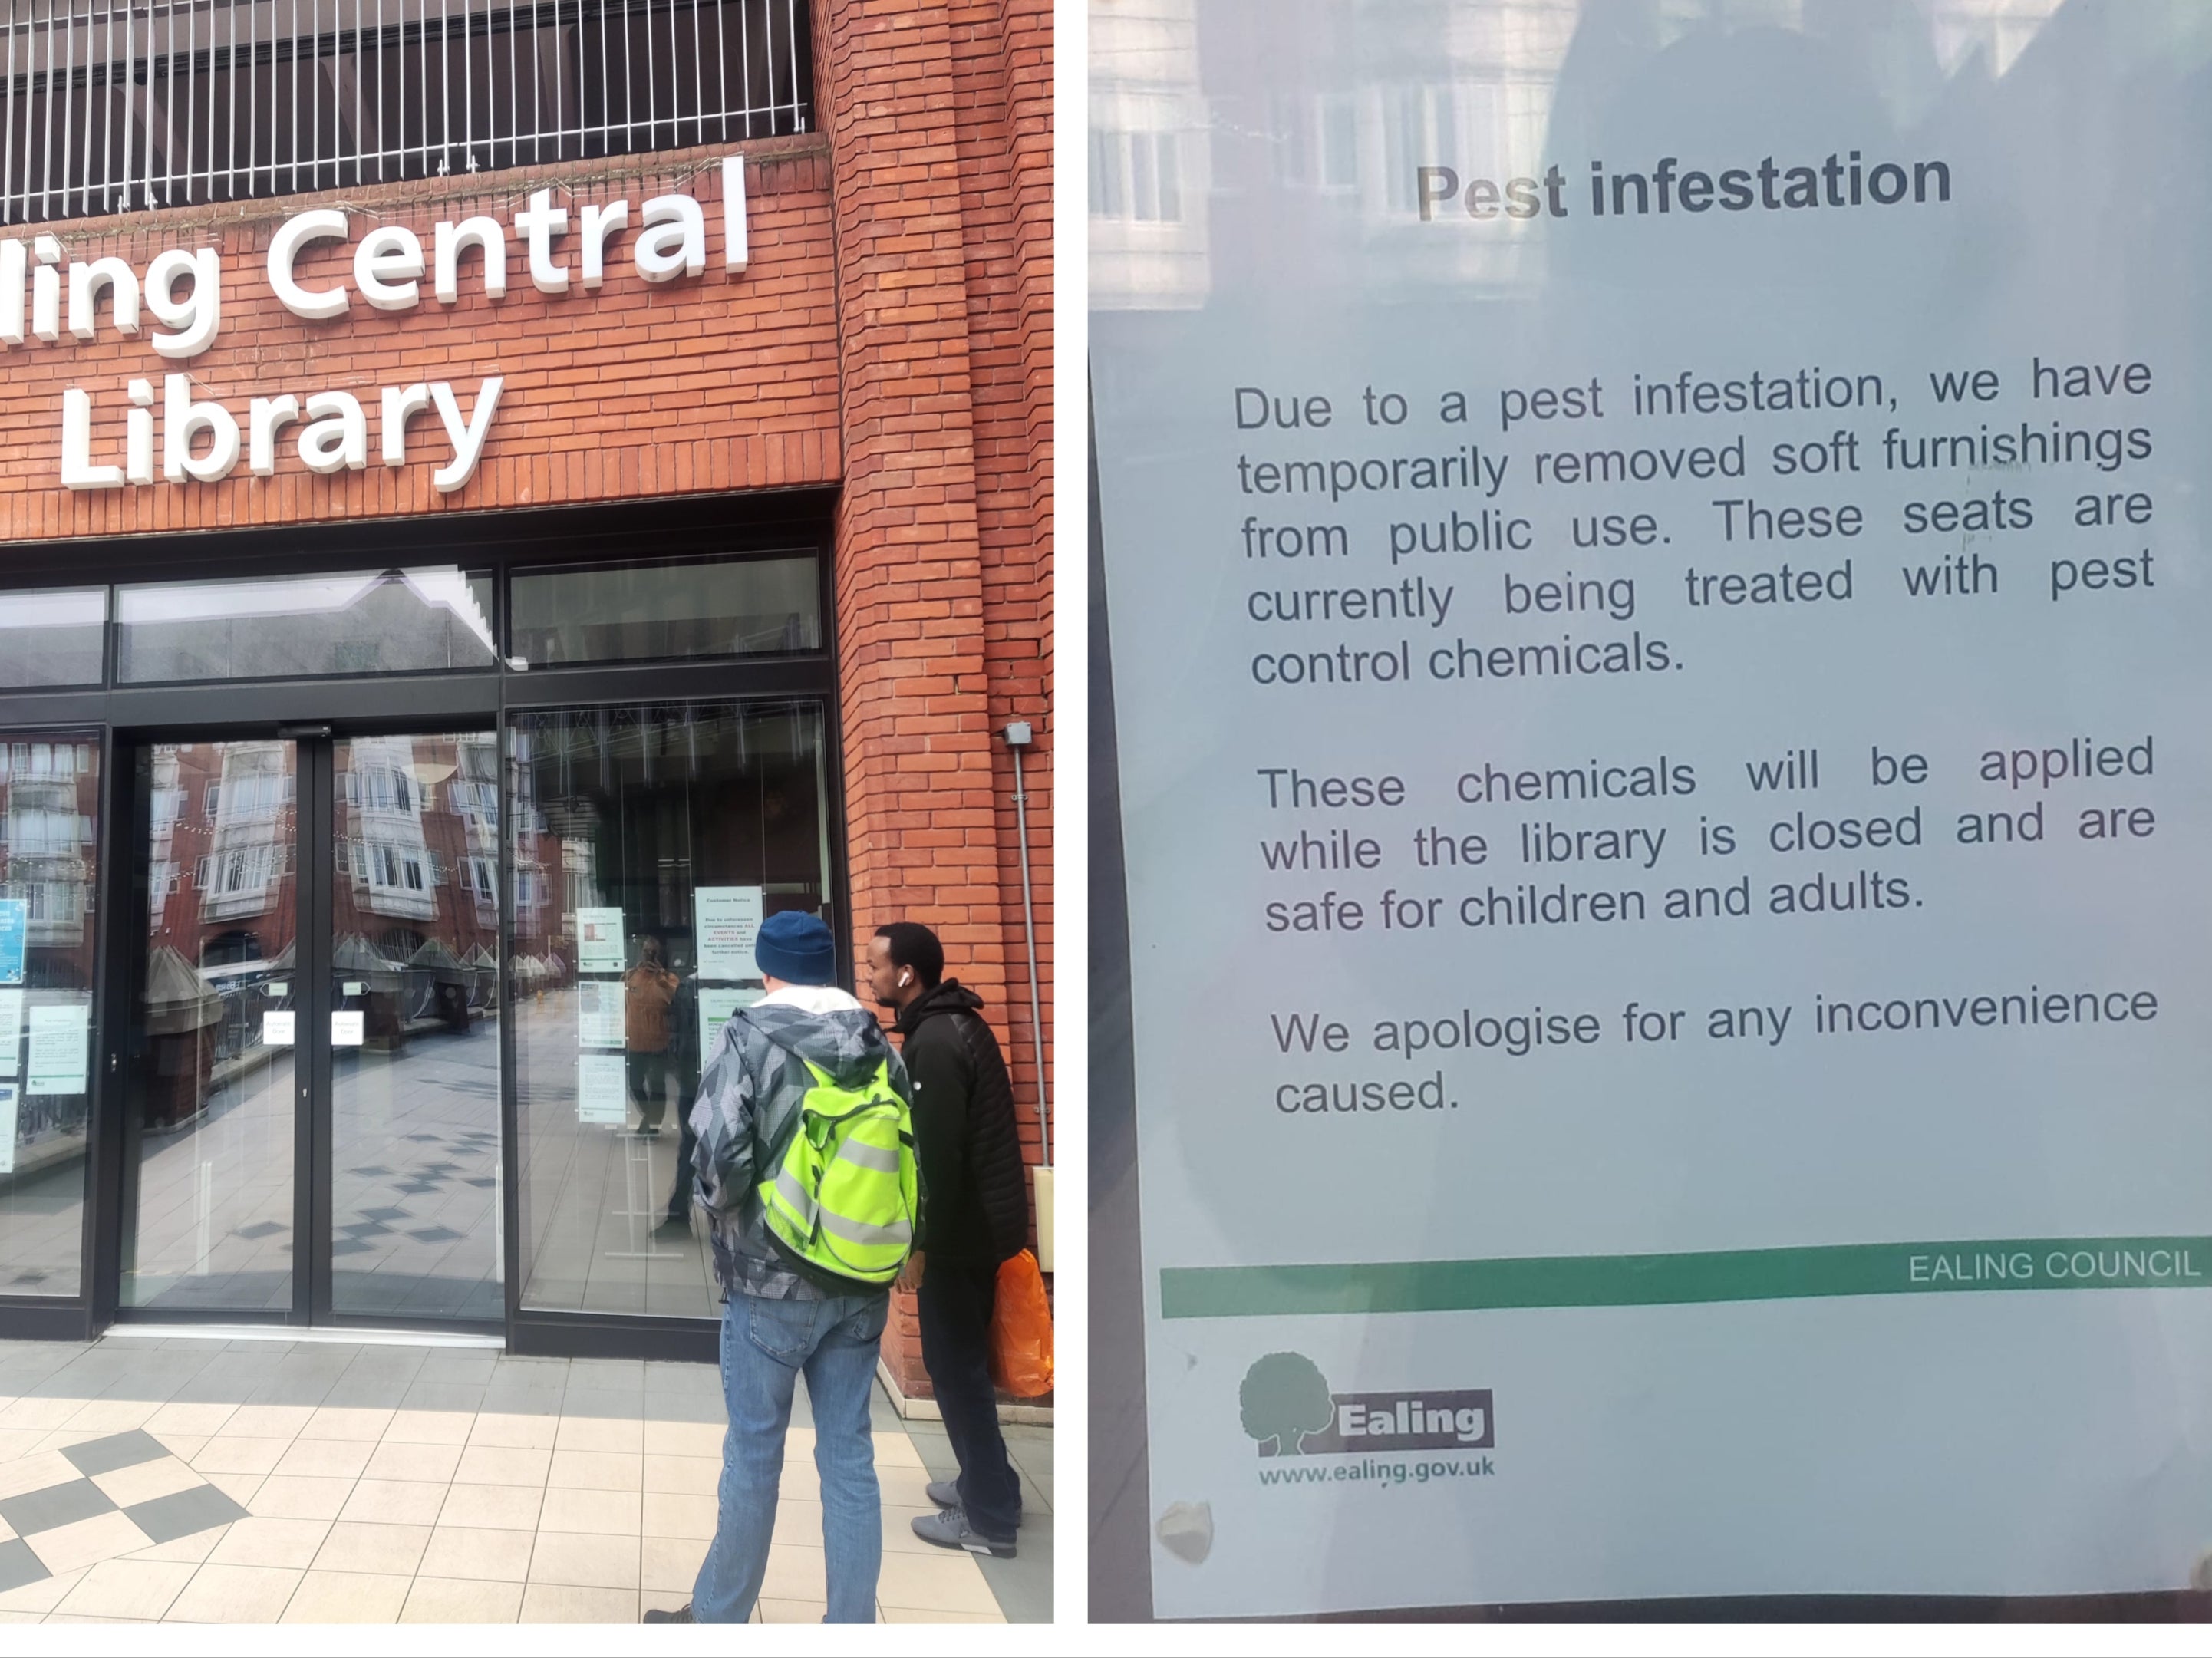 Ealing Library was forced to close after a bedbug infestation